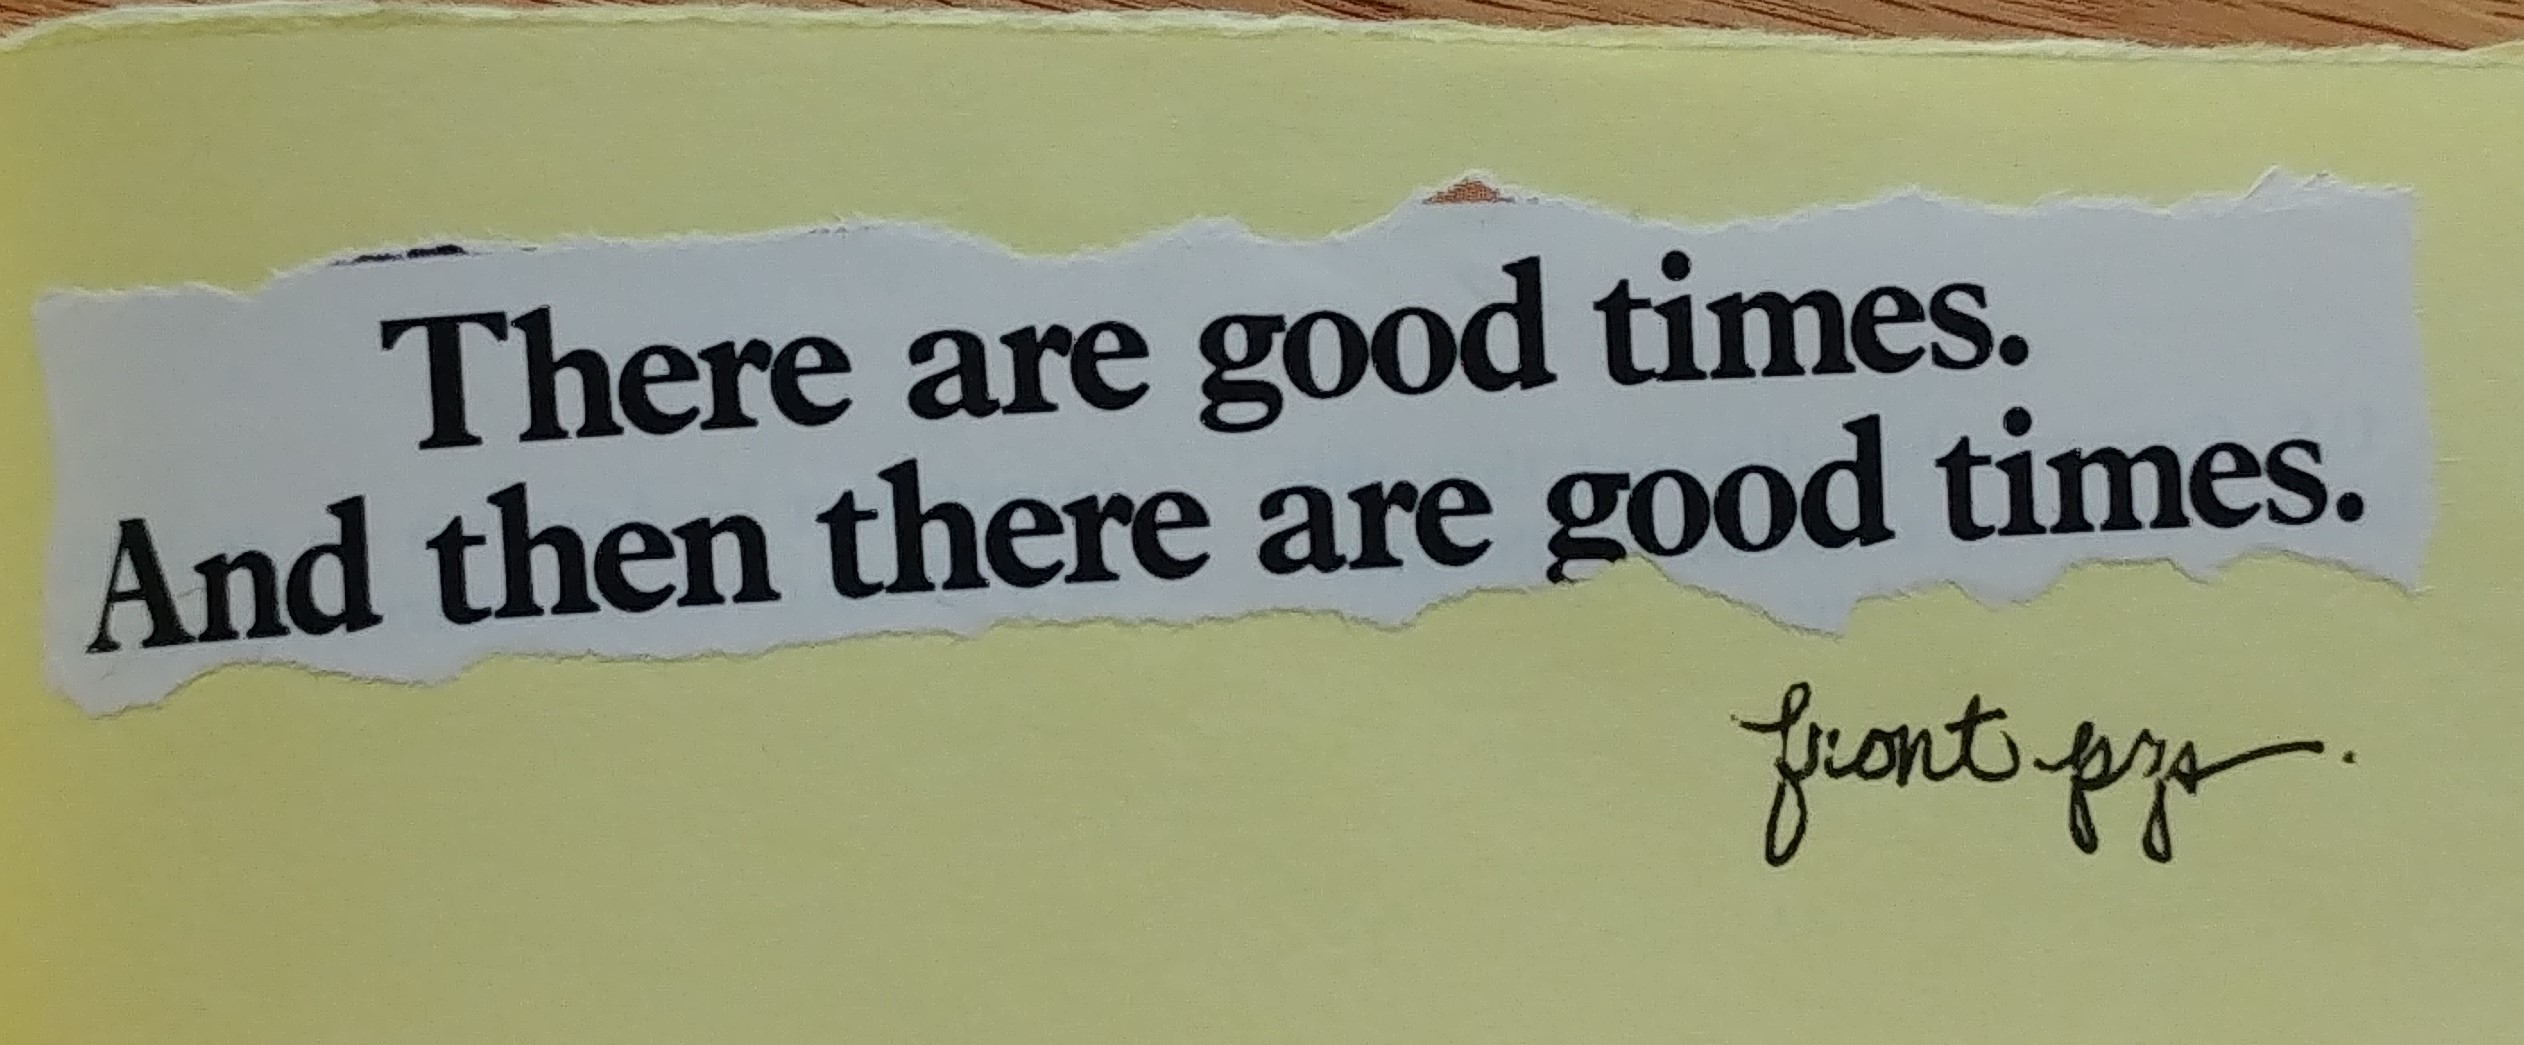 good-times quote